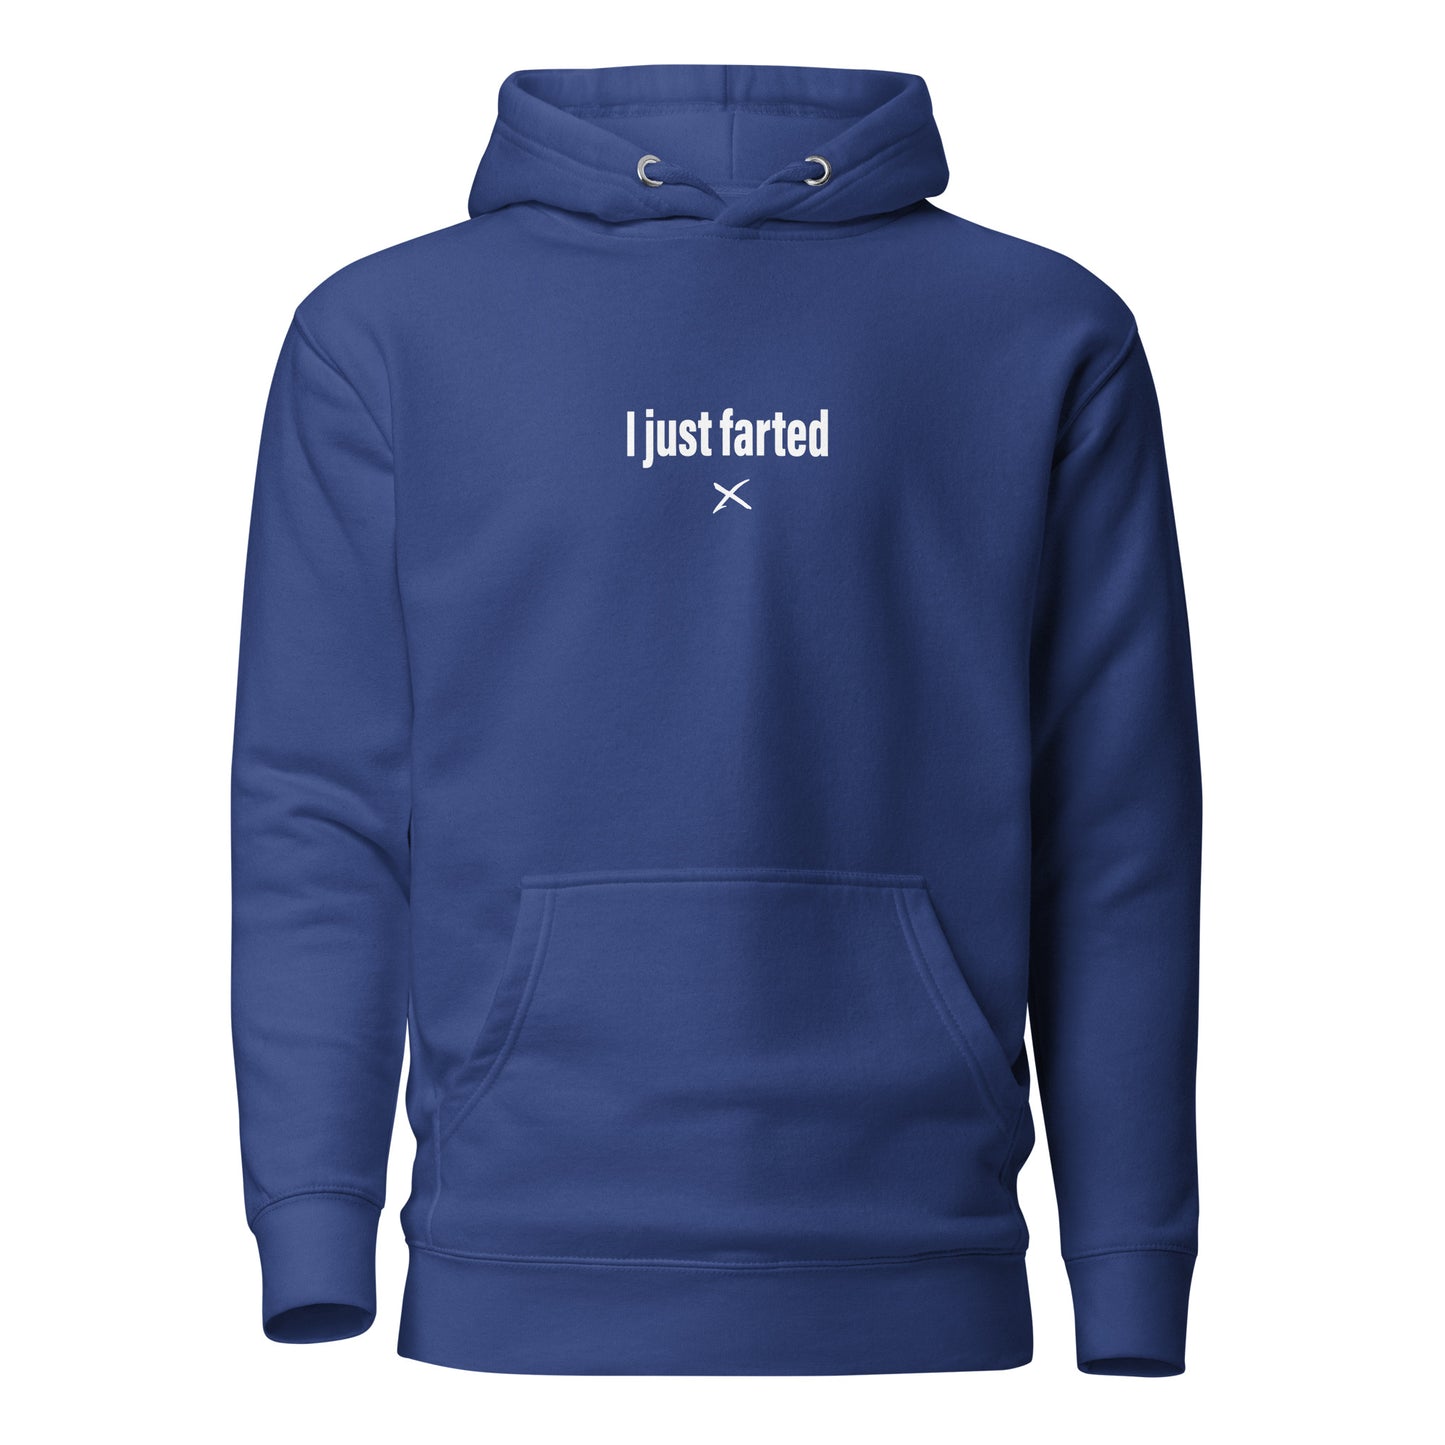 I just farted - Hoodie